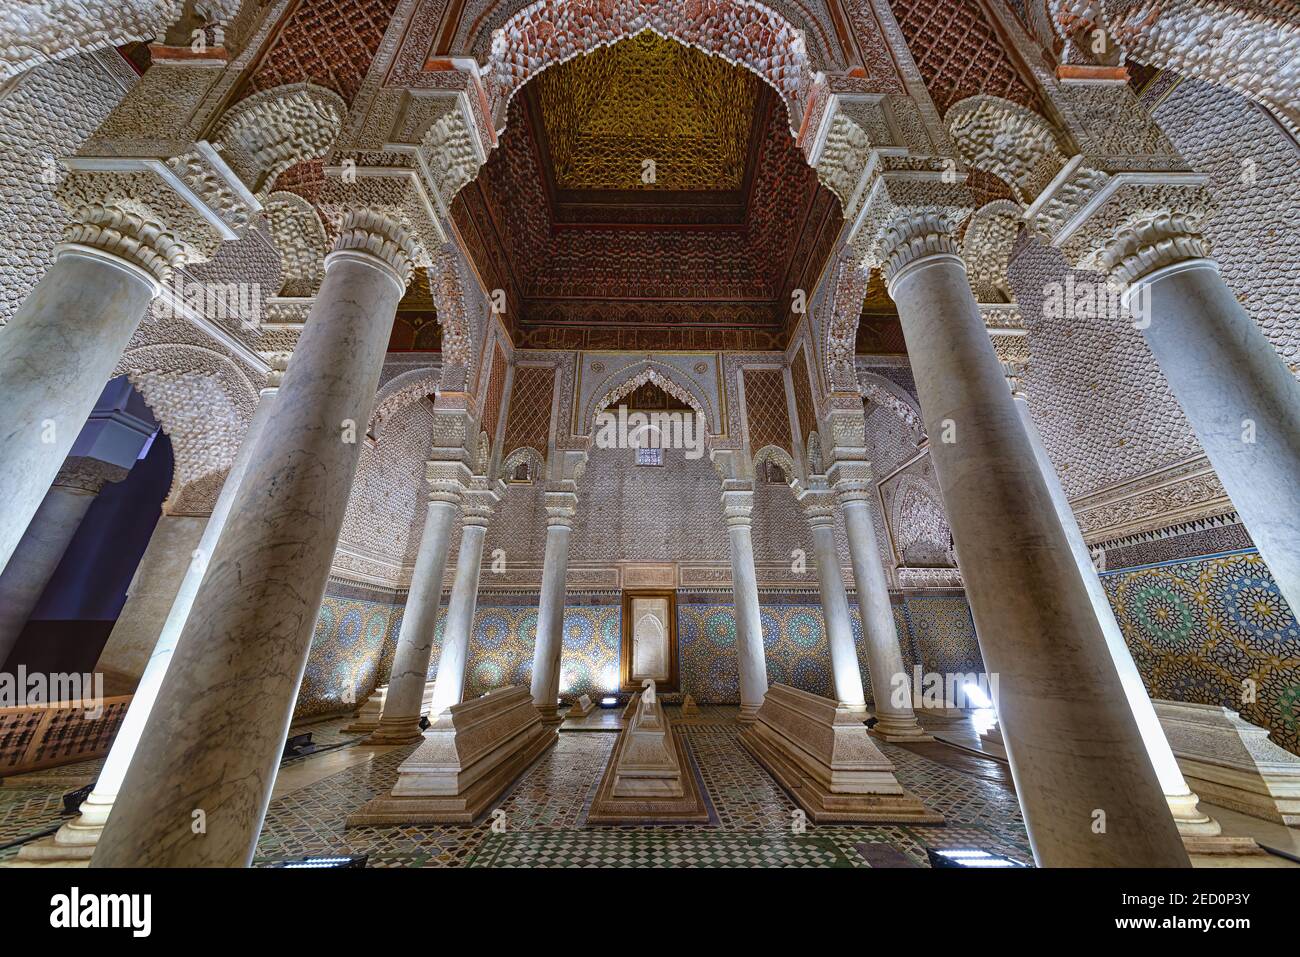 Marrakech, Morocco - December 30, 2017: The room with the twelve columns in Saadian Tombs. These tombs are sepulchres of Saadi Dynasty members Stock Photo